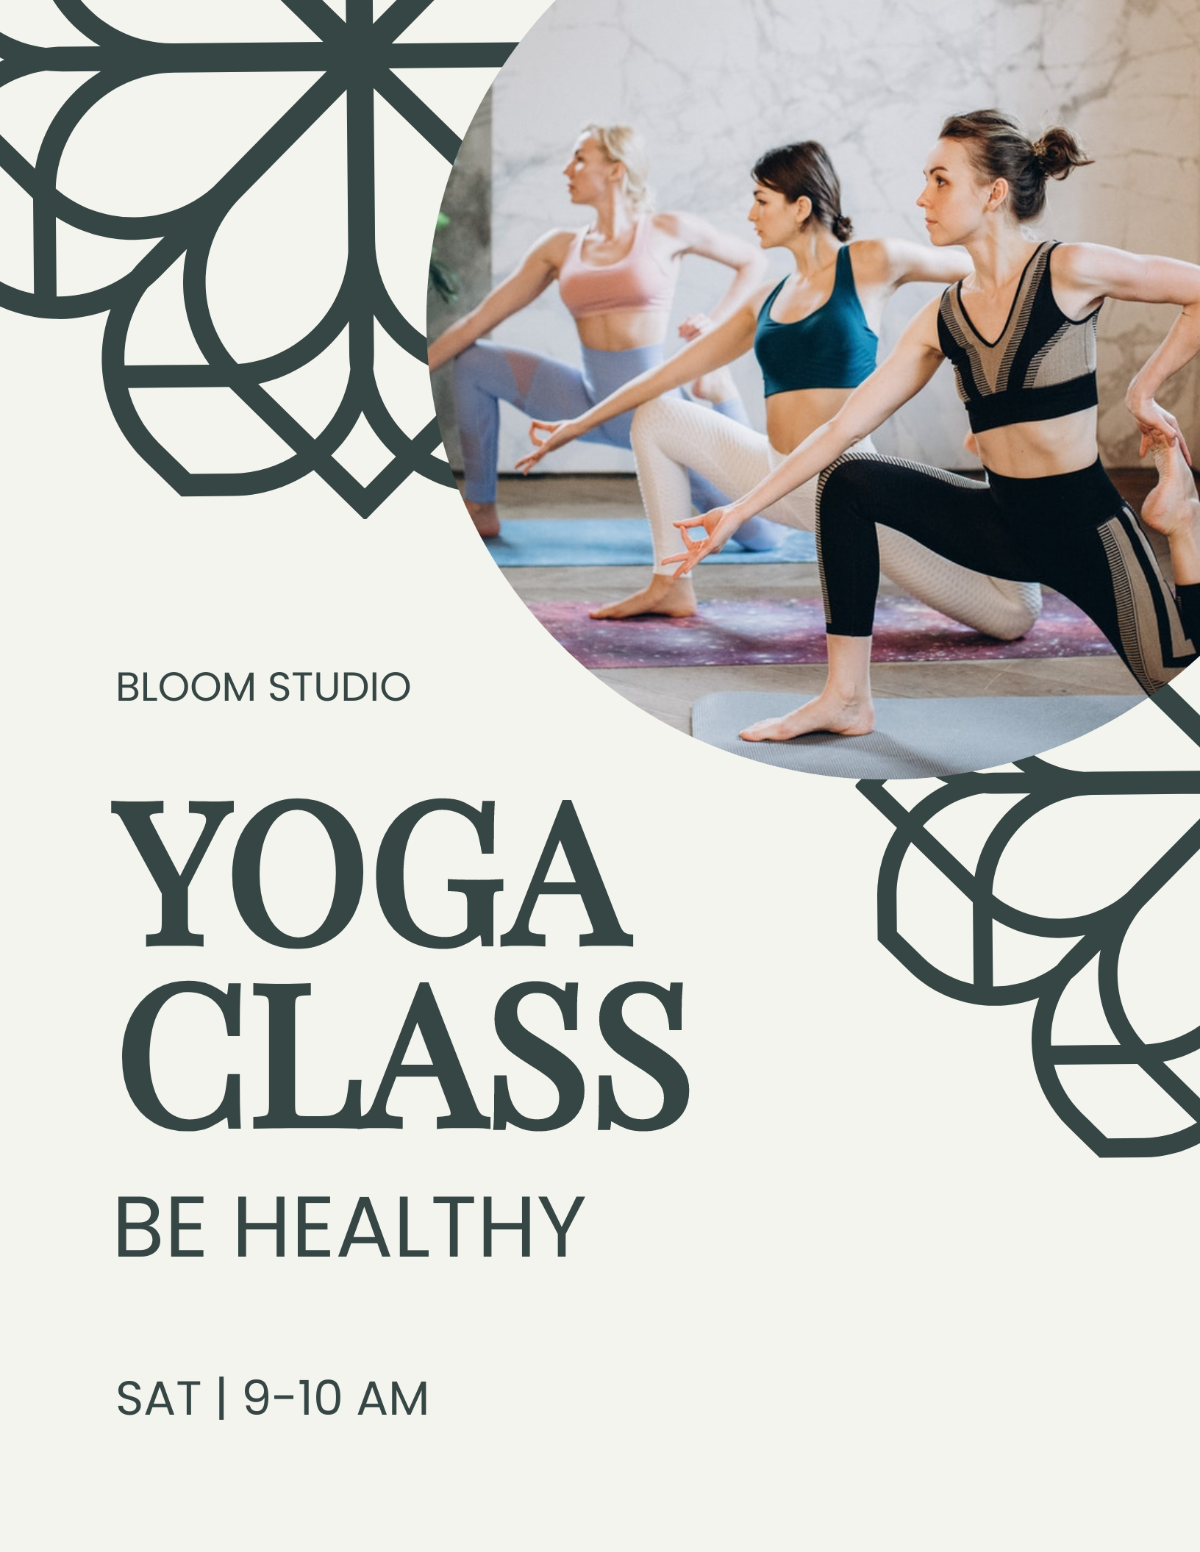 Yoga Classes Offer Flyer Template